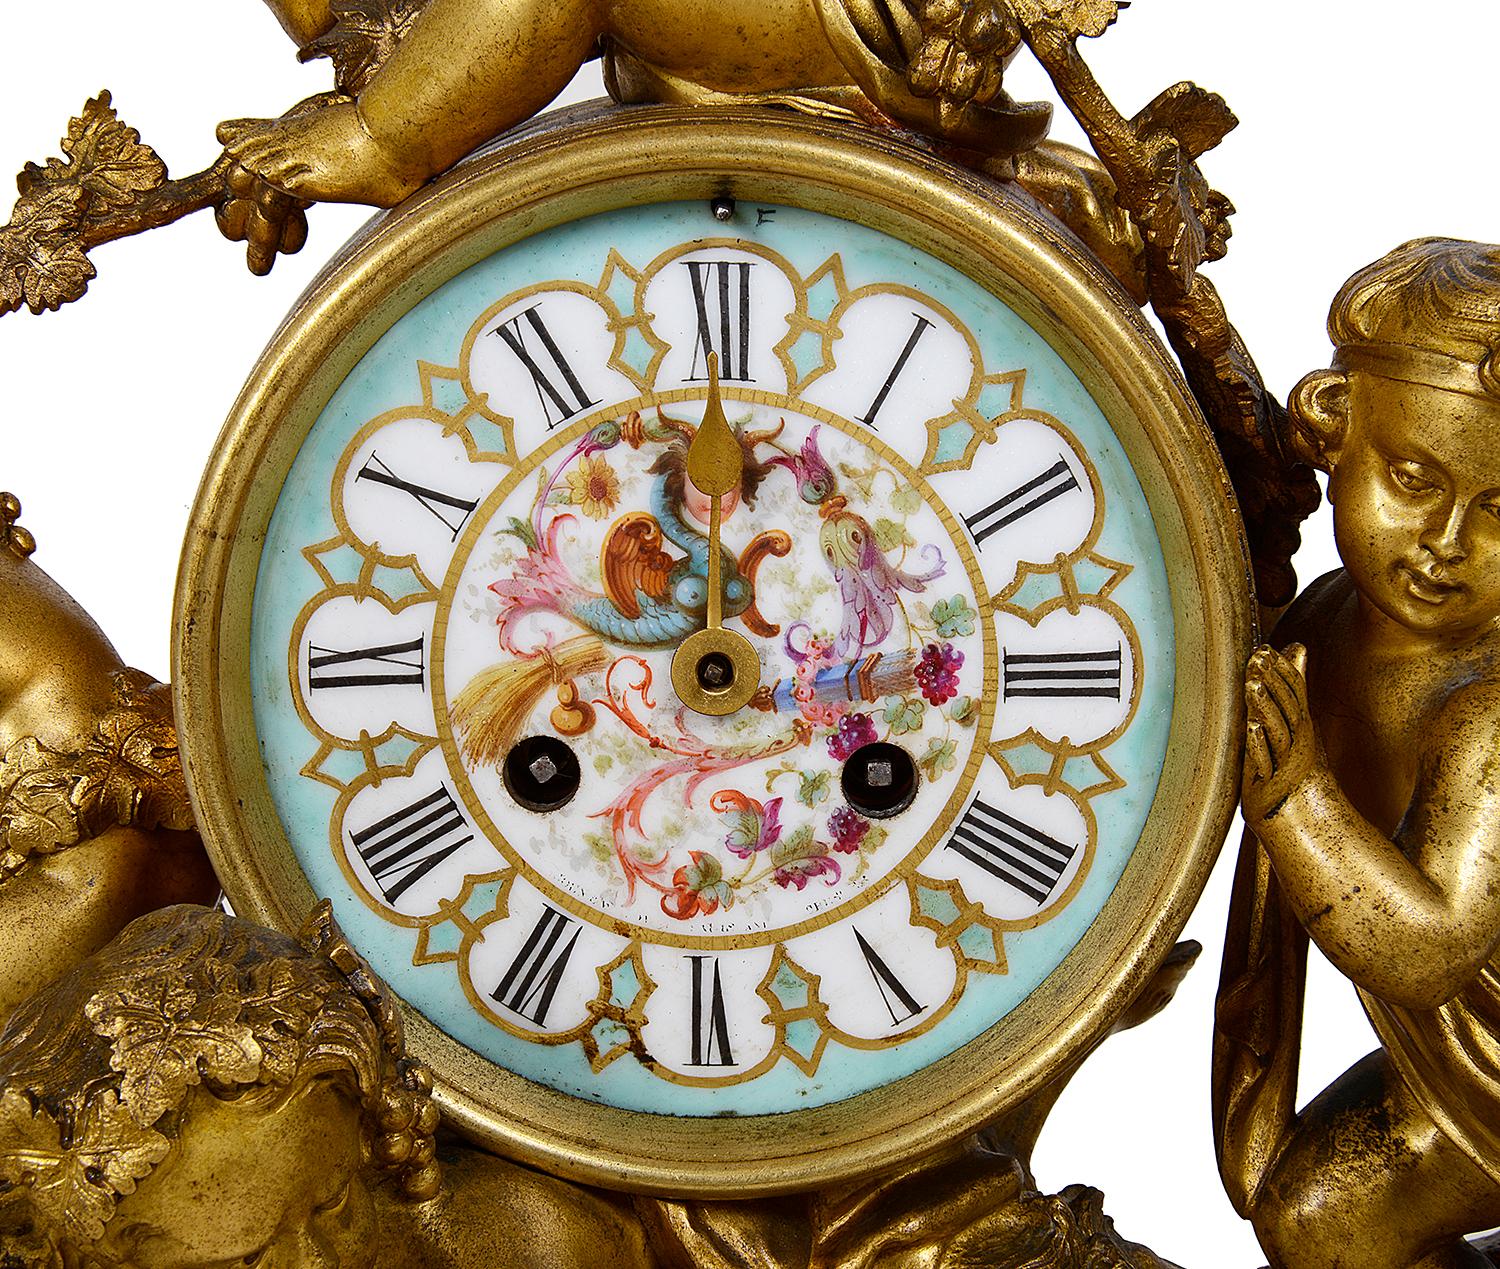 An enchanting 19th century Louis XVI style gilded Bacchus influenced ormolu mantel (fireplace) clock depicting three putti rolling a barrel on the back of a cloven hoofed putti. The hand painted porcelain clock face within the barrel has an eight